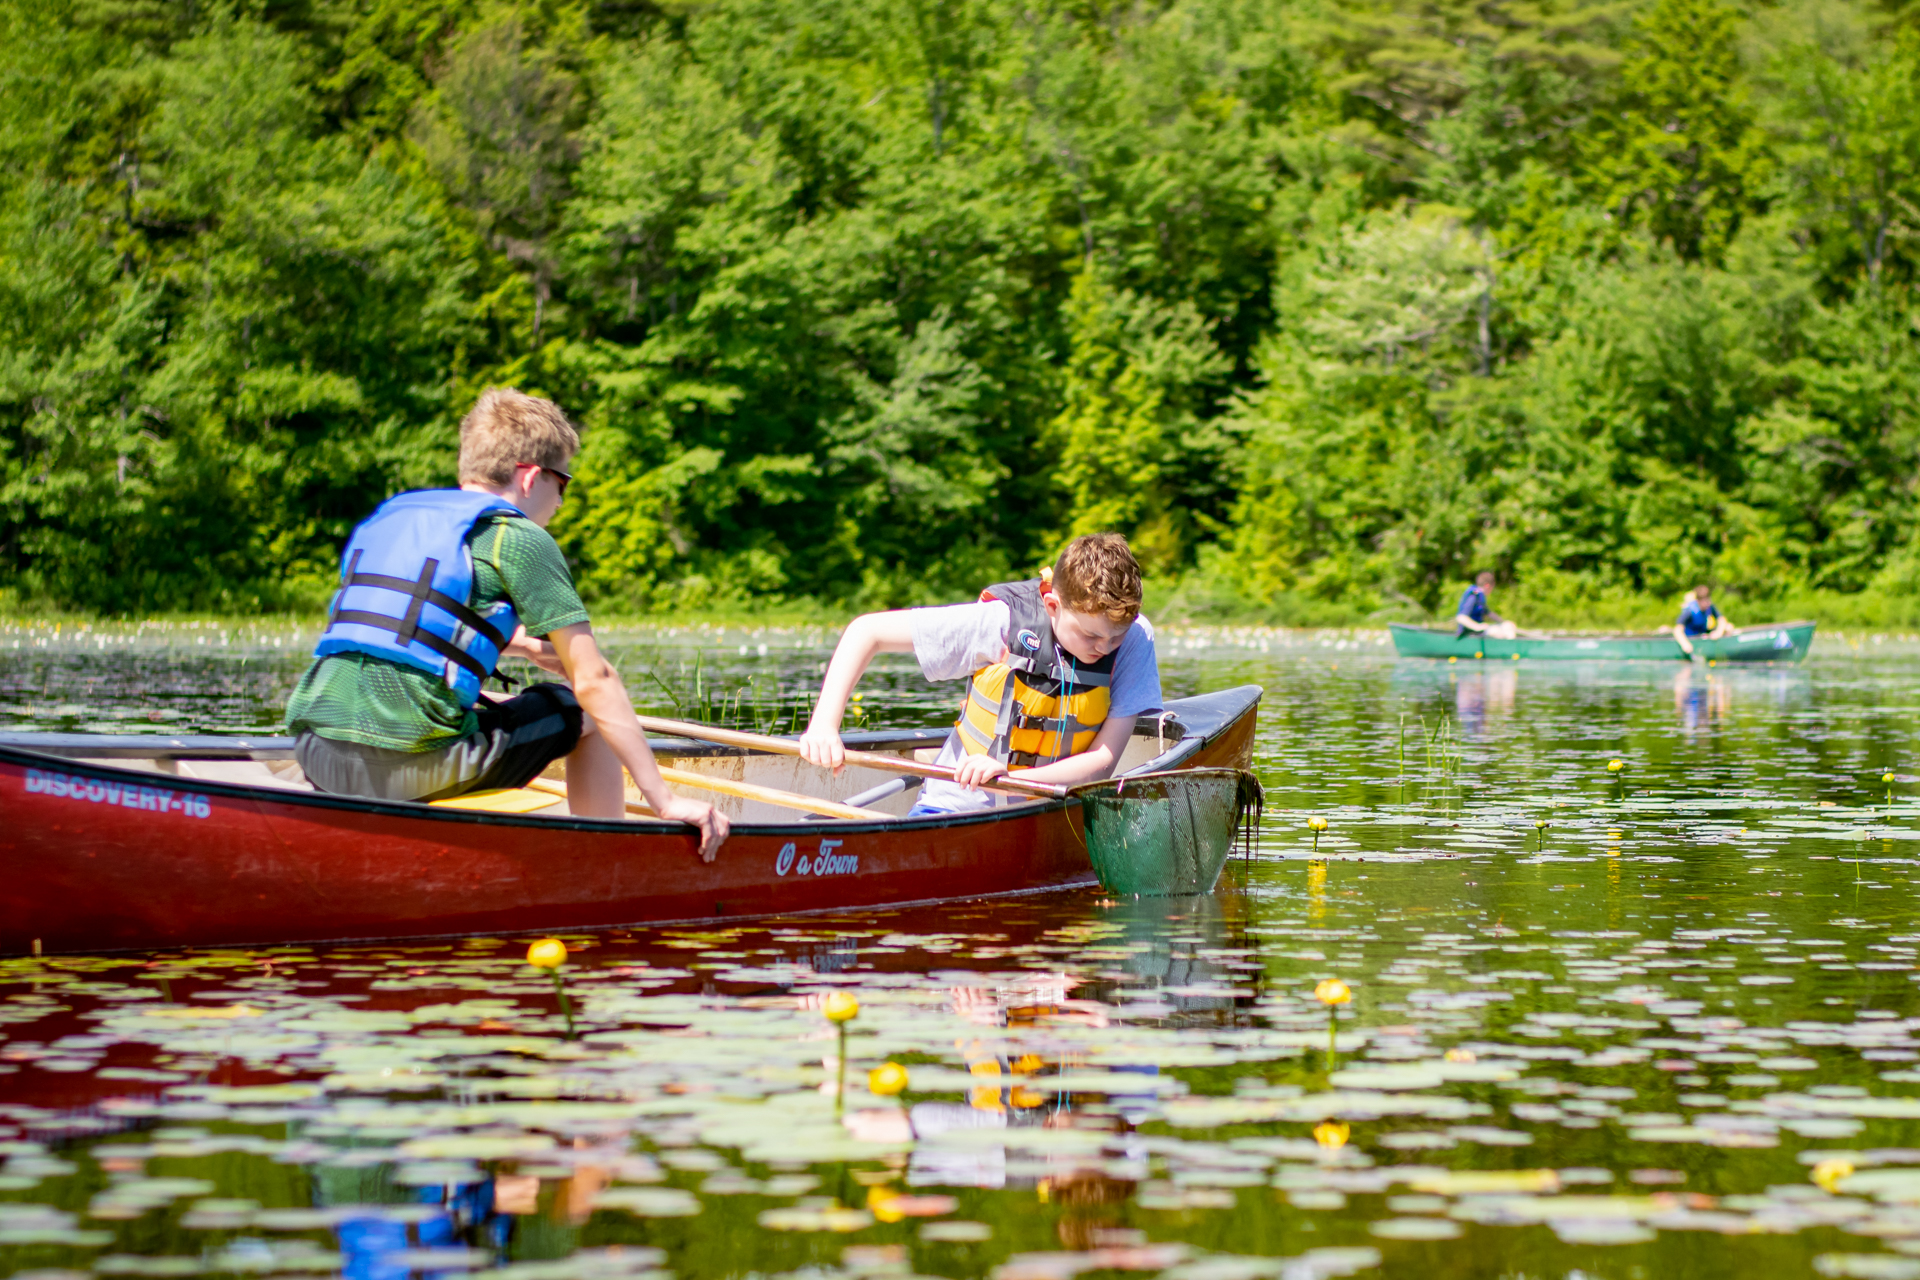 Two boys, both wearing life jackets, seated in a red canoe on calm lake water, surrounded by lily pads and yellow pond lily flowers. One camper is steadying the canoe while the other peers into a green ponding net he is holding over the water.